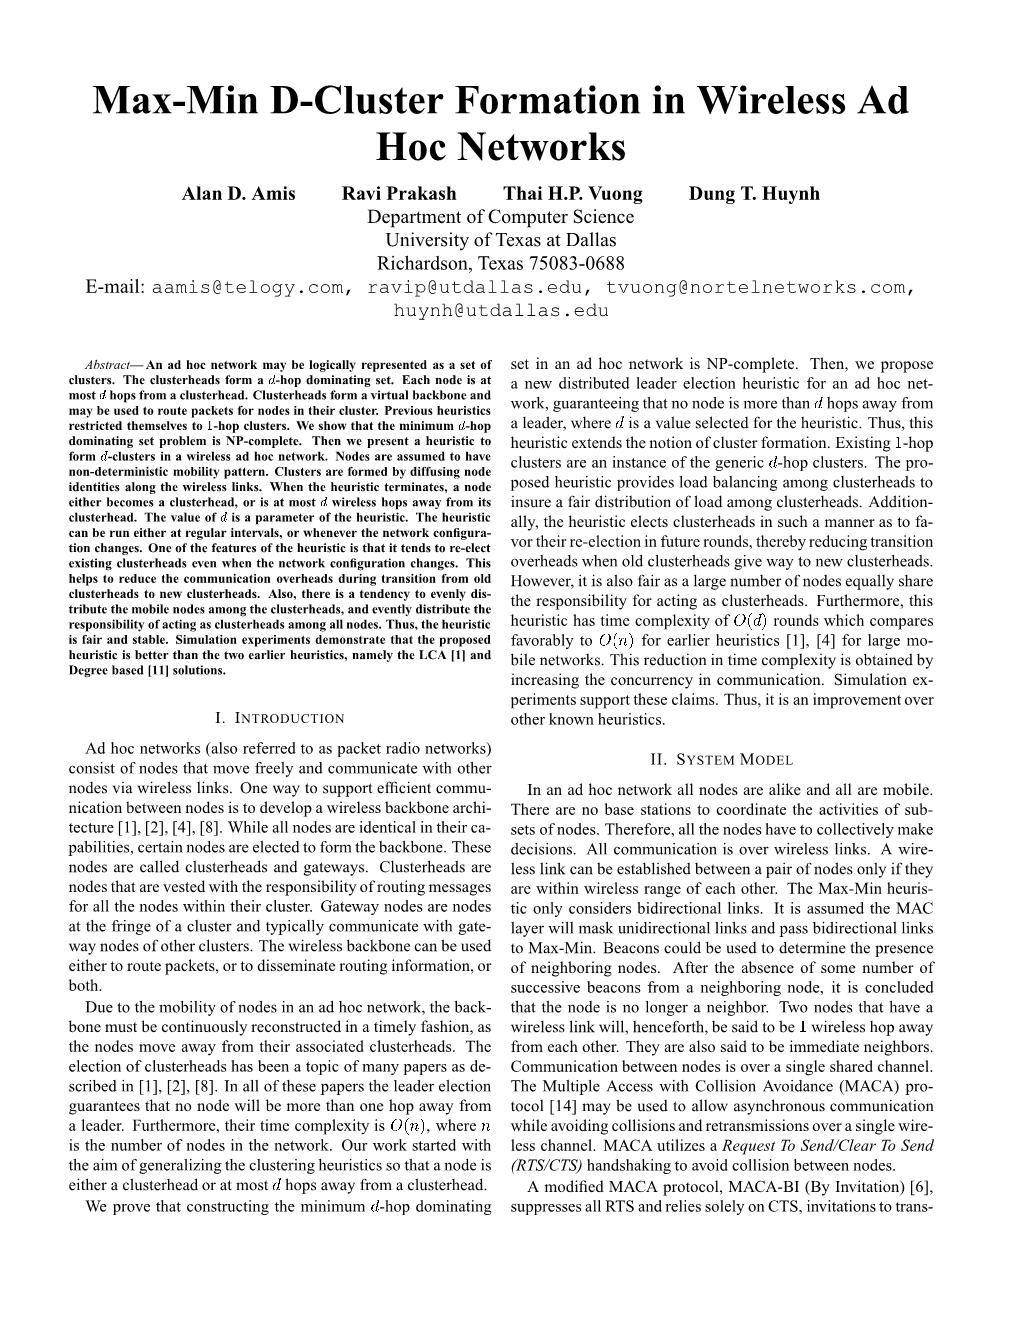 Max-Min D-Cluster Formation in Wireless Ad Hoc Networks Alan D